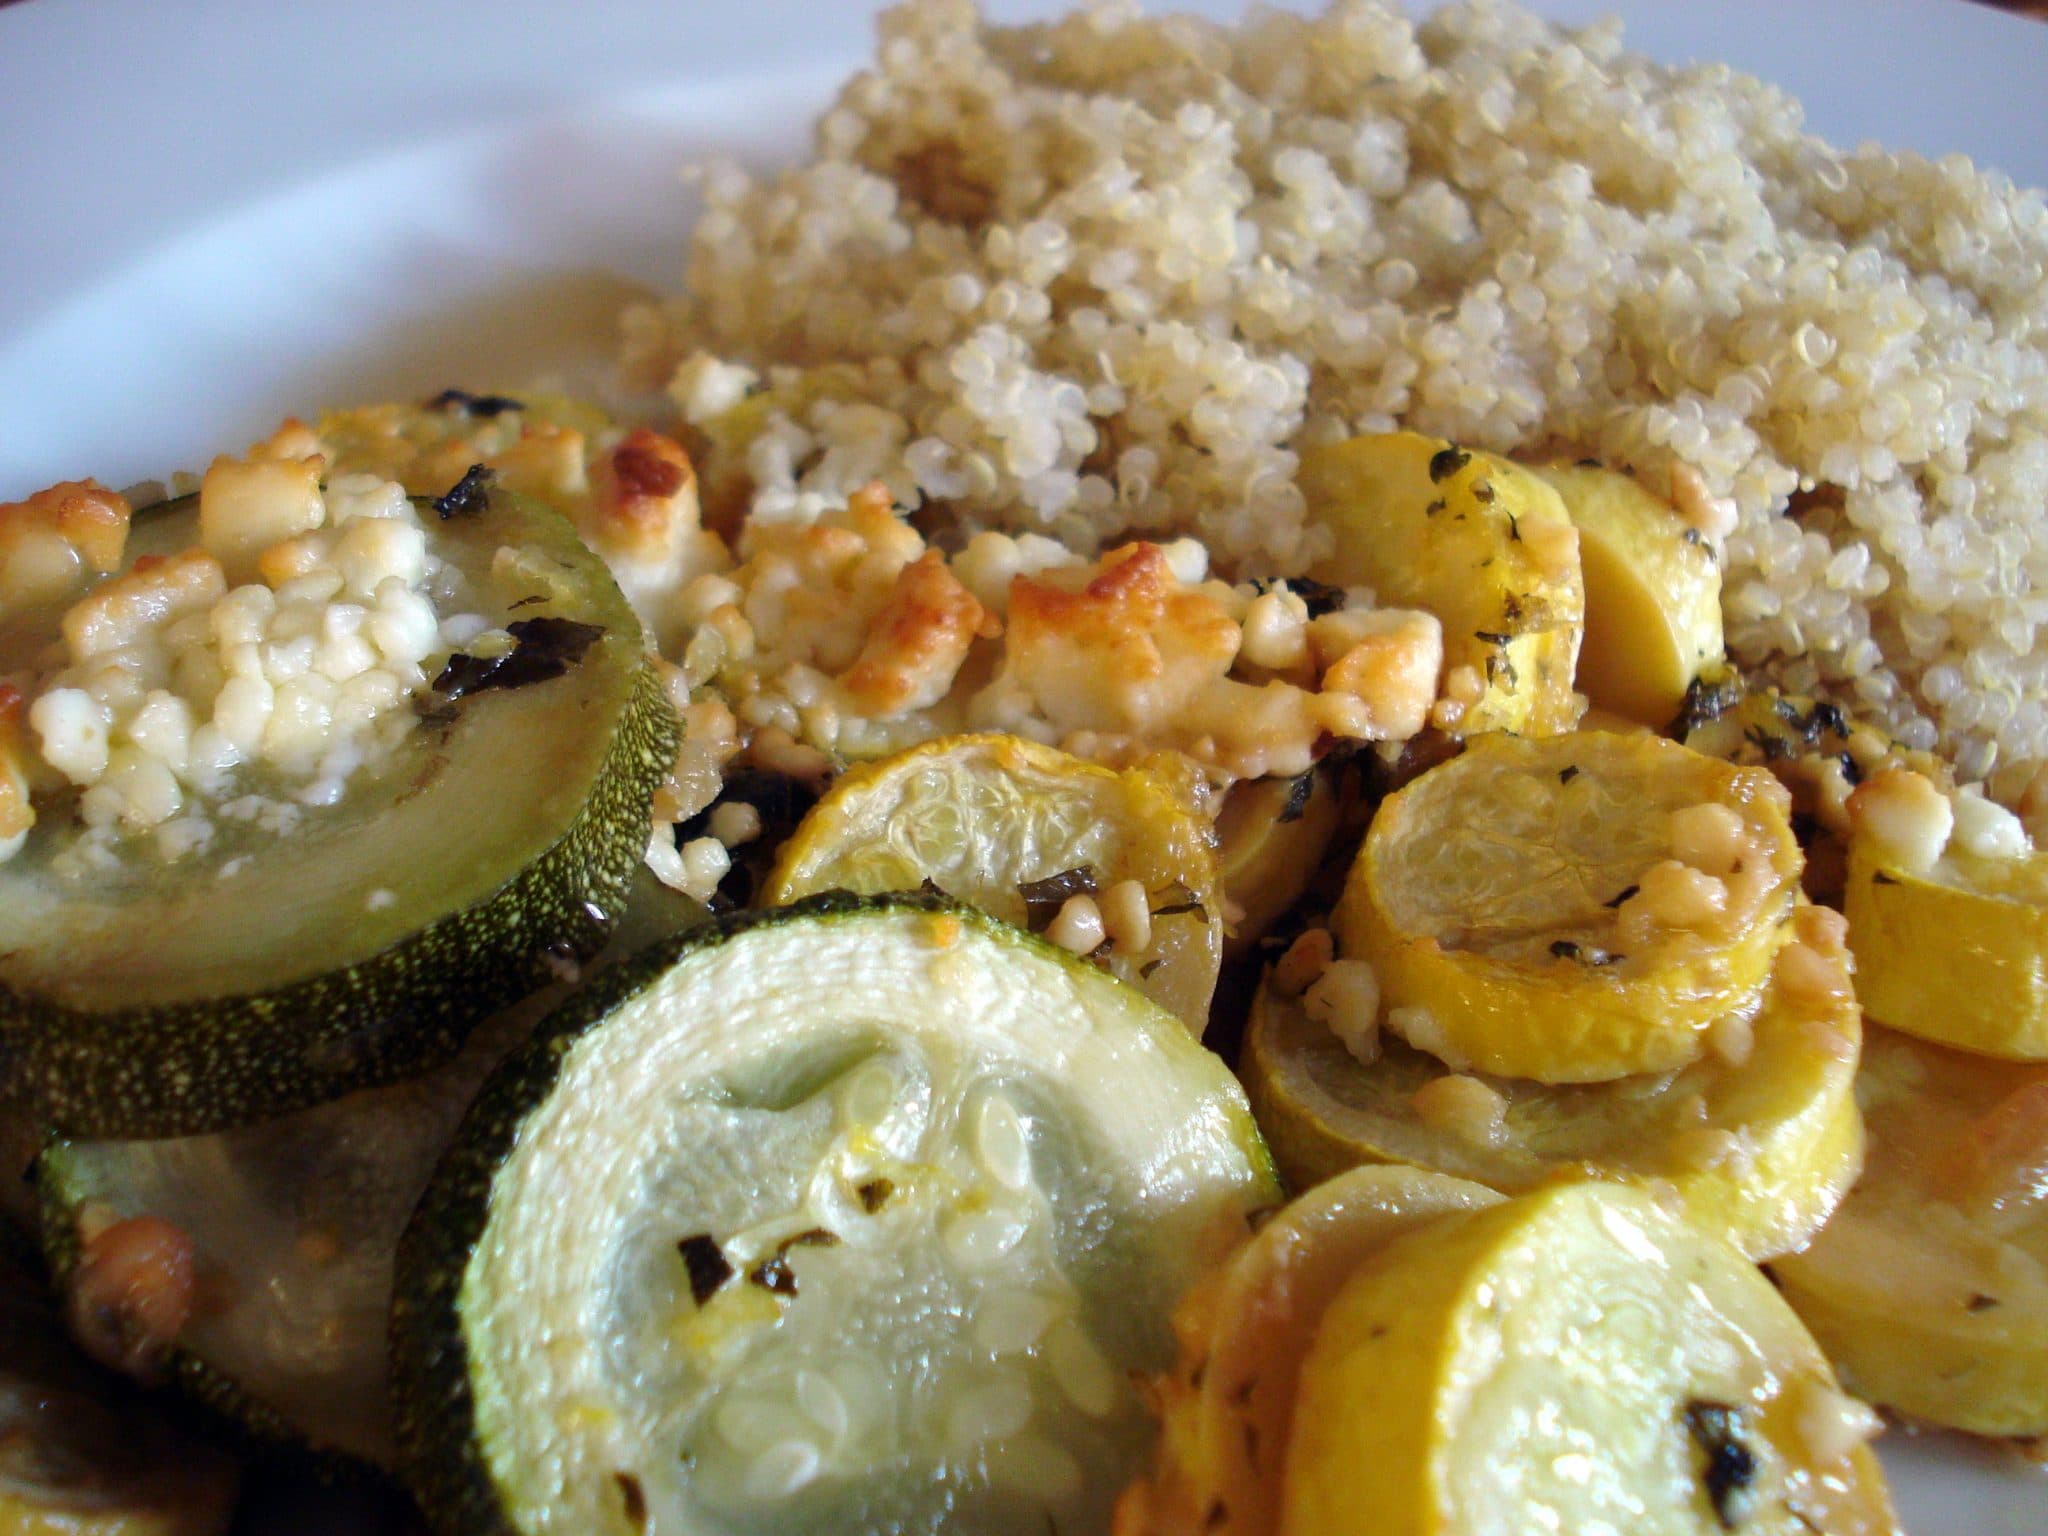 Roasted squash and zucchini on plate with quinoa